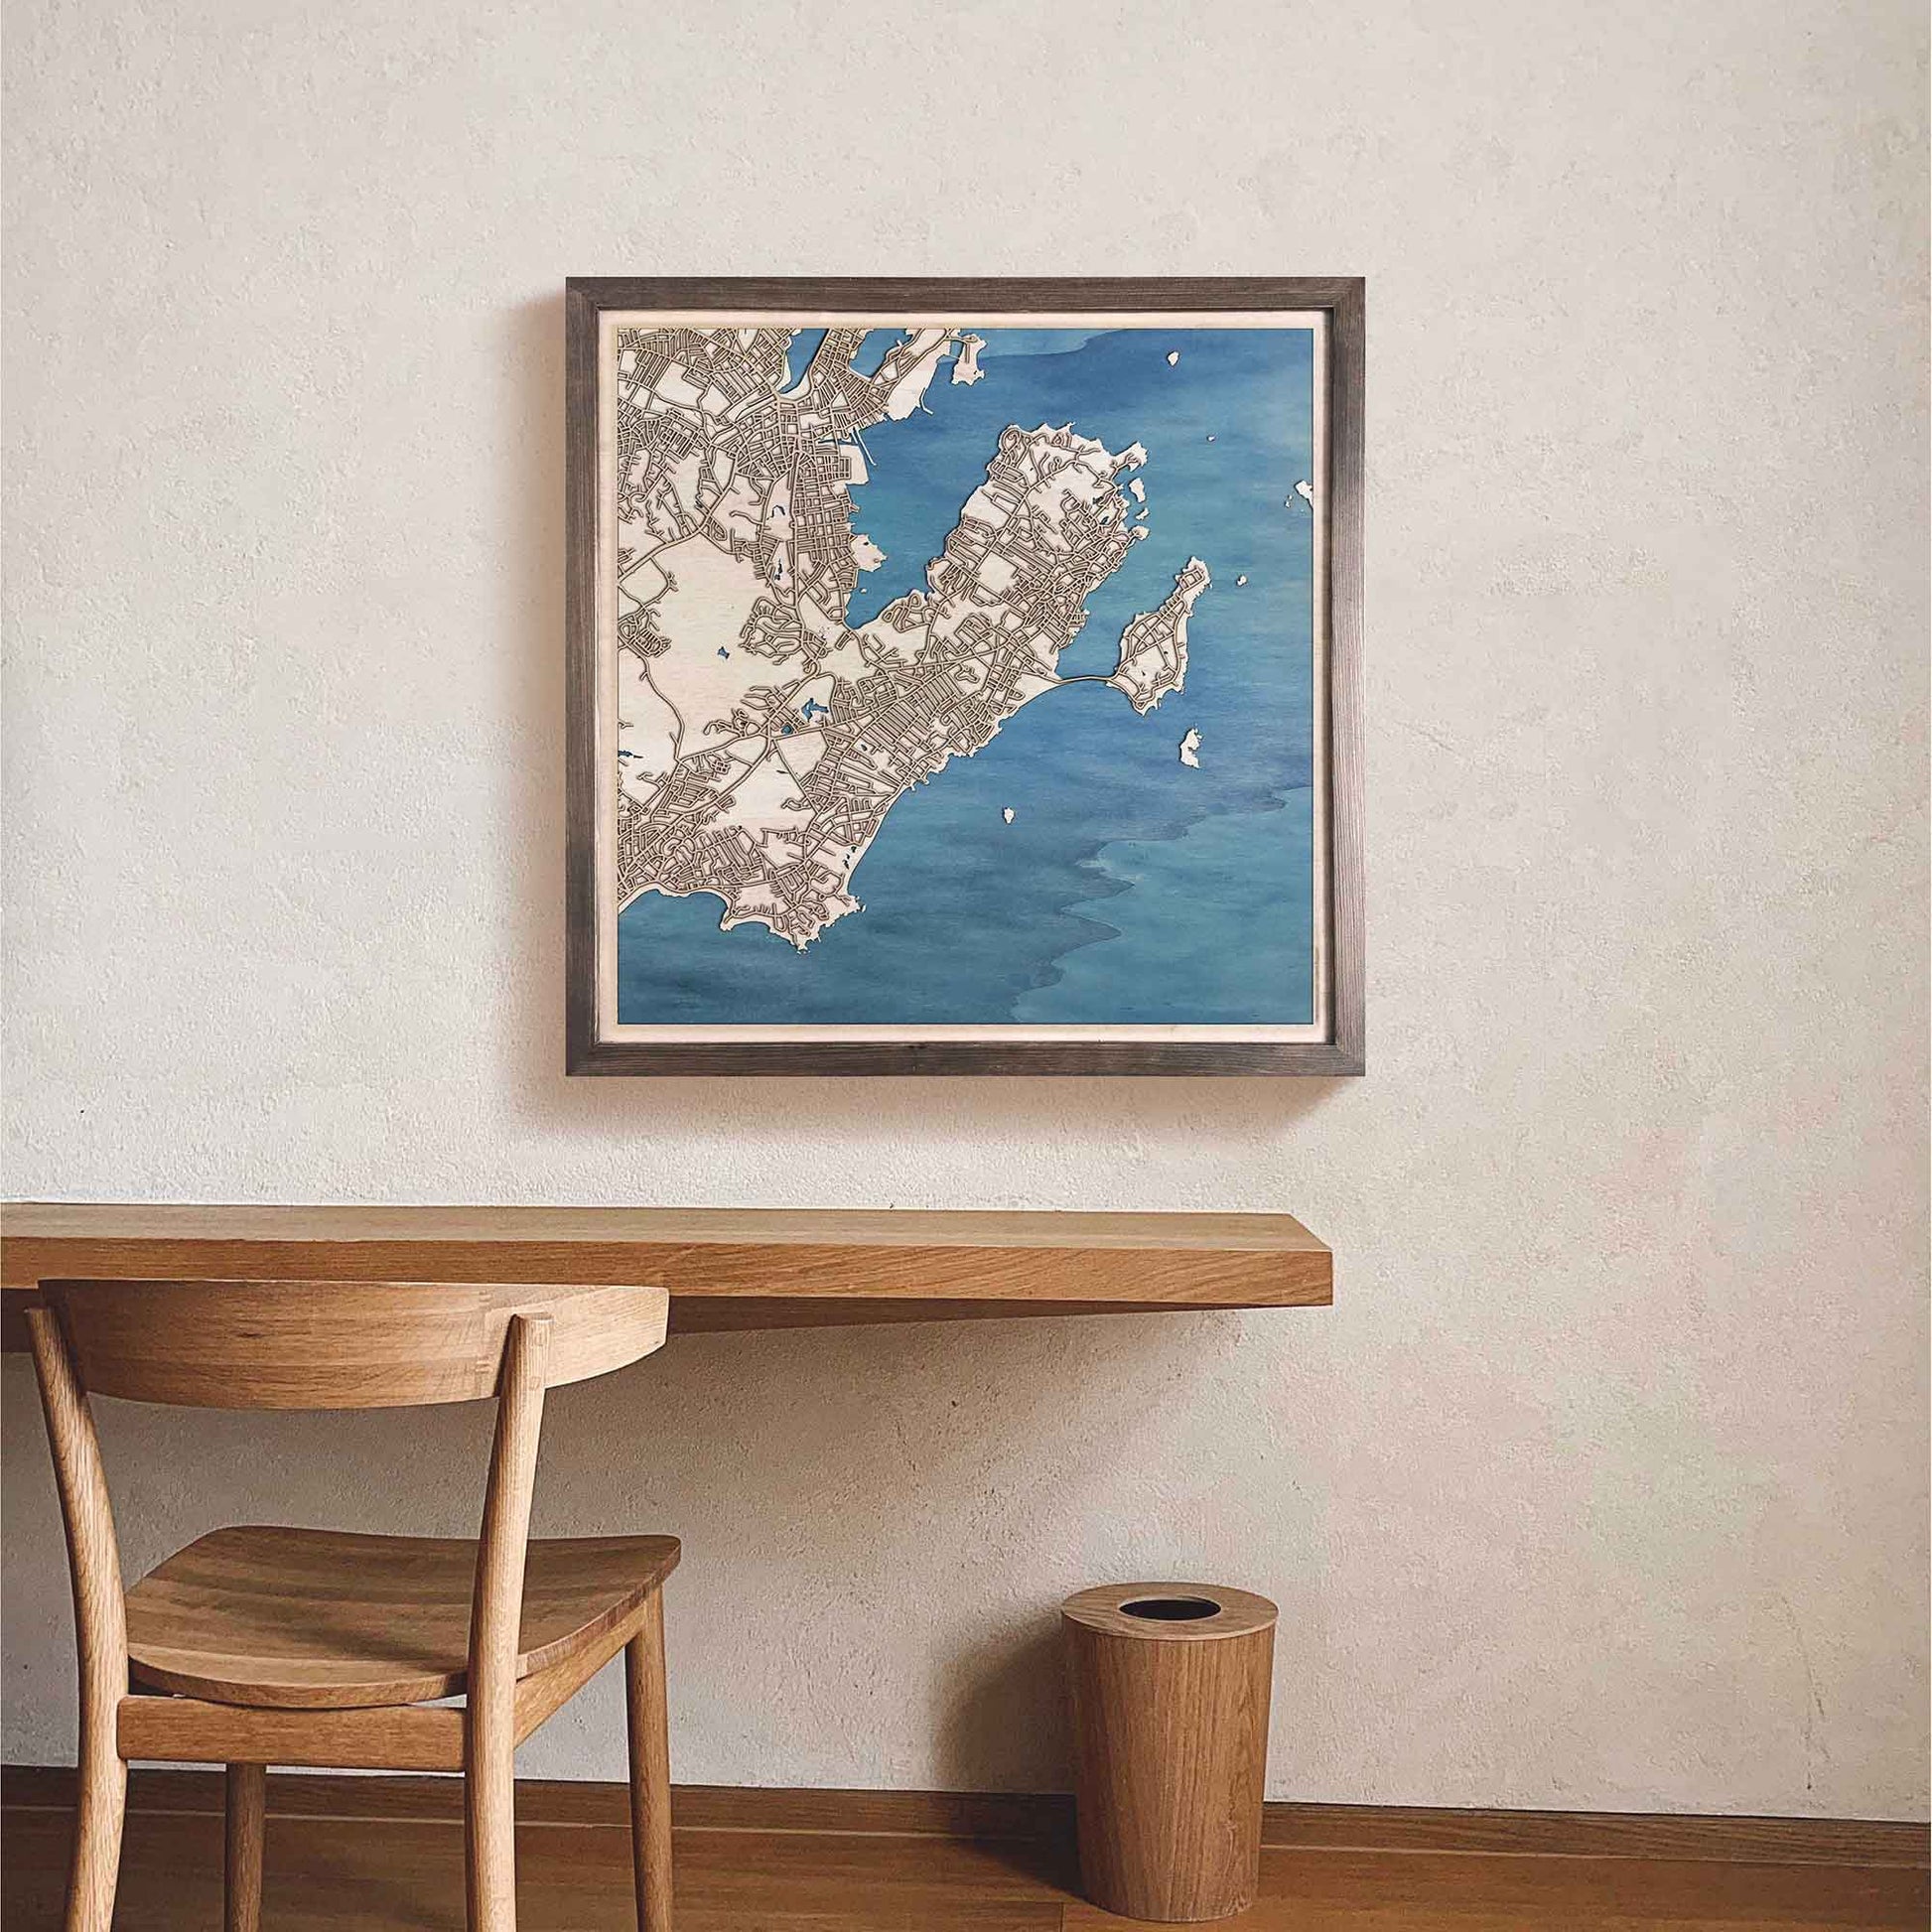 Marblehead Wooden Map by CityWood - Custom Wood Map Art - Unique Laser Cut Engraved - Anniversary Gift